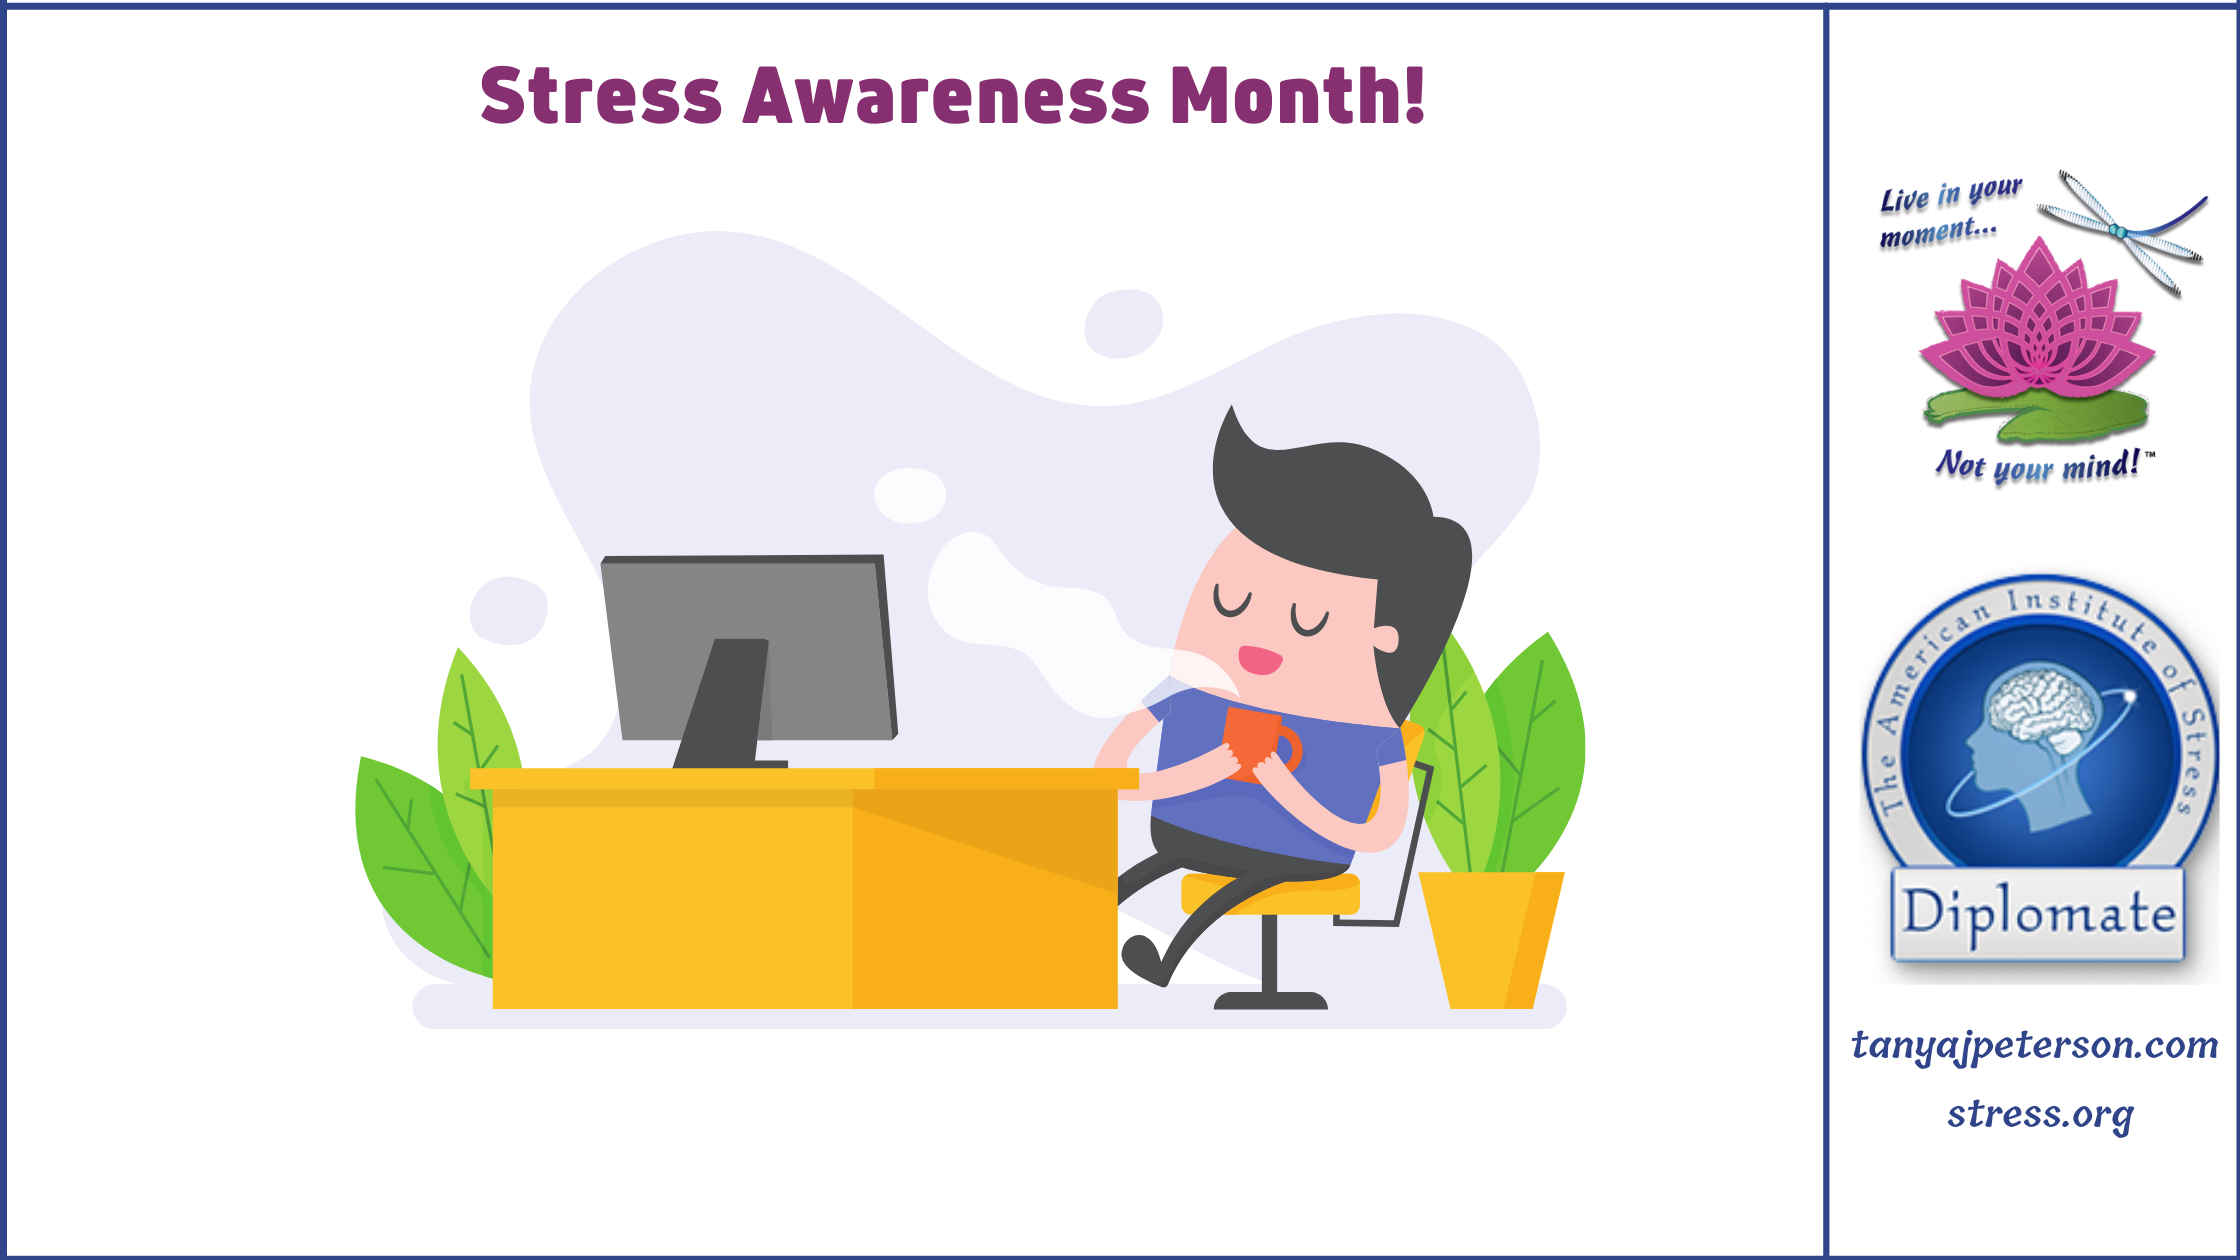 Constant rushing causes stress and keeps the body’s fight-or-flight response activated. This is damaging to total health, wellbeing. Take minibreaks to reset.